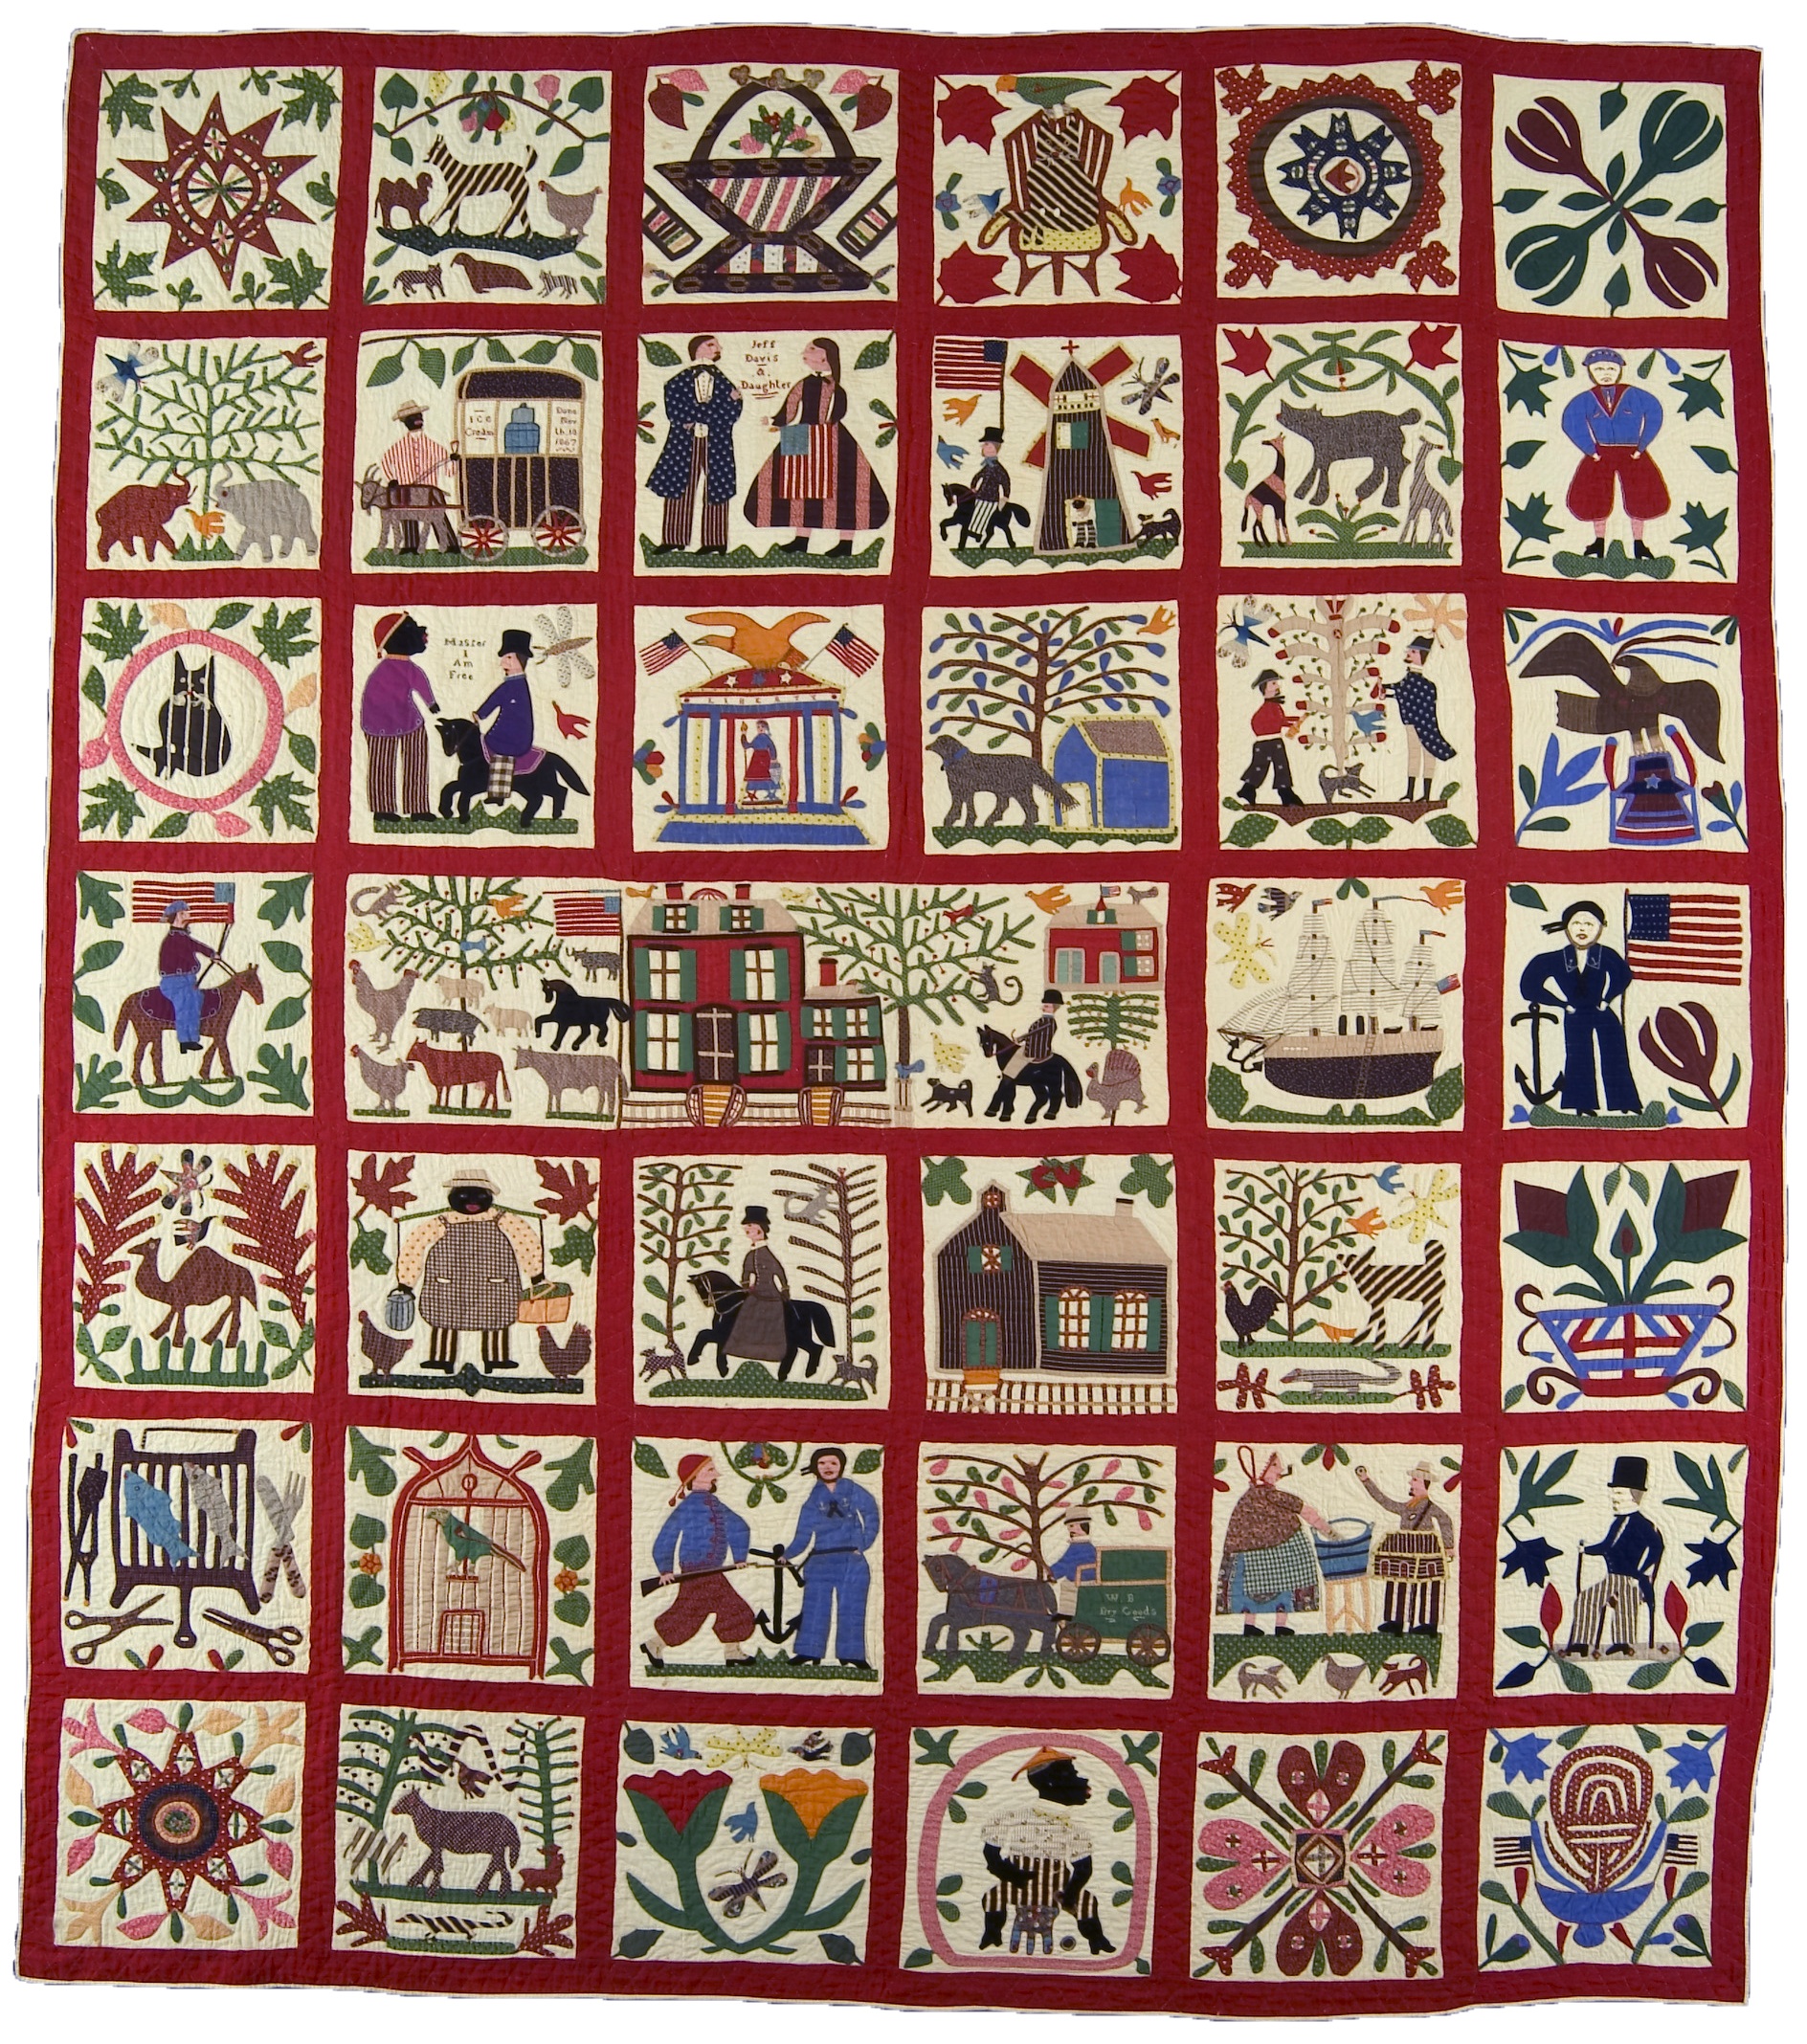 Reconciliation Quilt: Lucinda Ward Honstain's vision of the Civil War ...